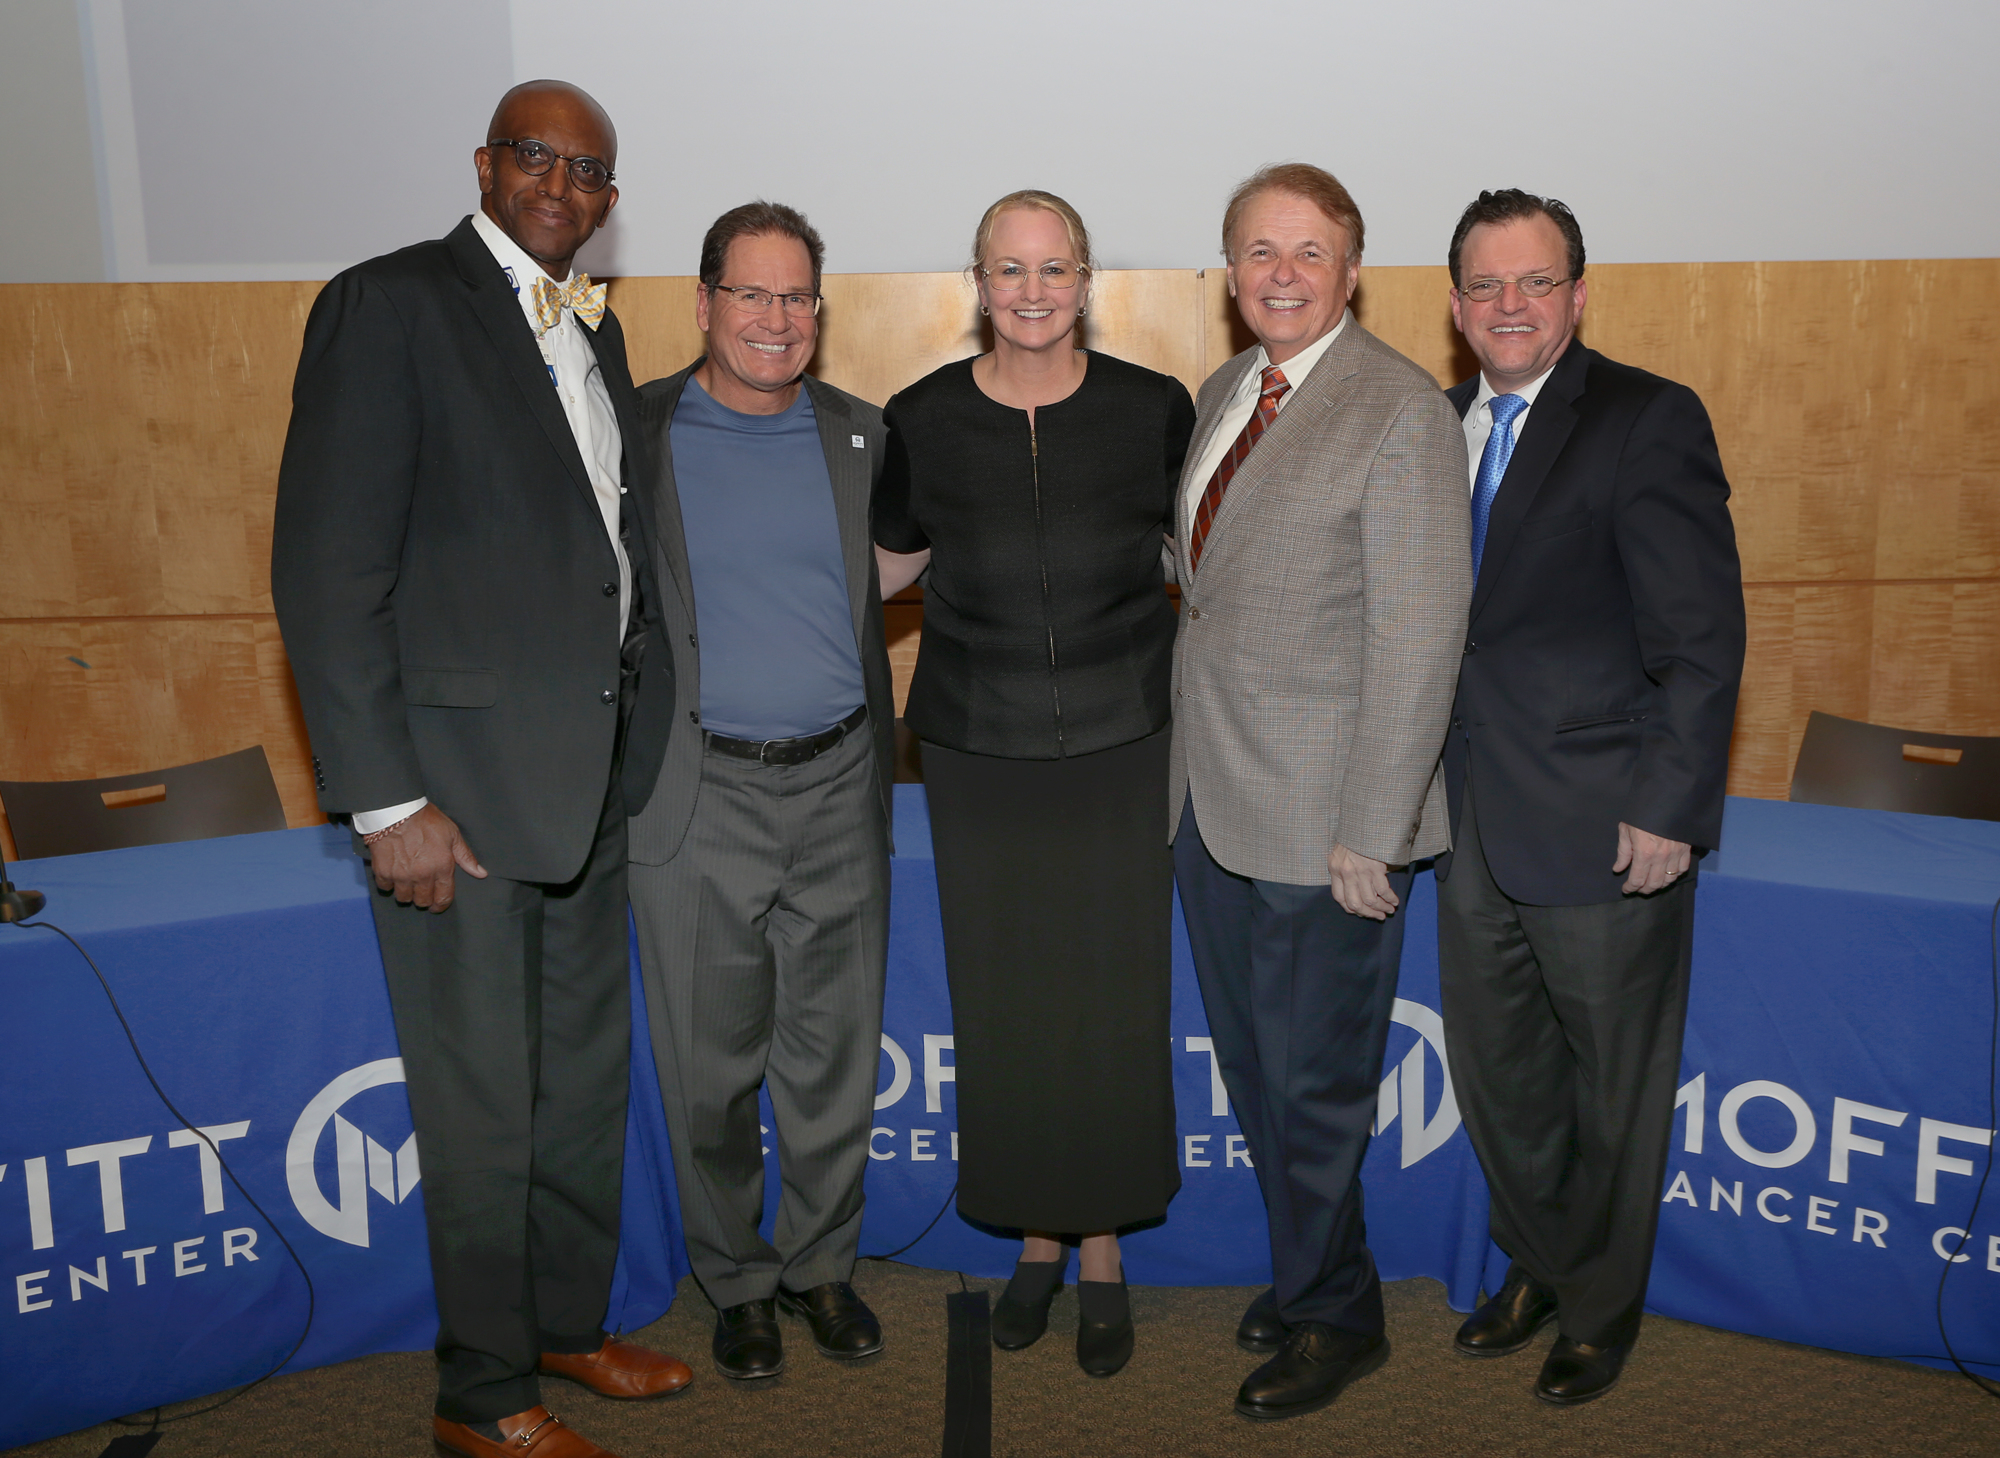 Courtesy, Rich Schineller. Dr. Lee Green, Dr. Doug Letson, Dr. Sarah Hoffe, Larry Thompson and Dr. Jason Fleming at an event unveiling the 360-degree video.